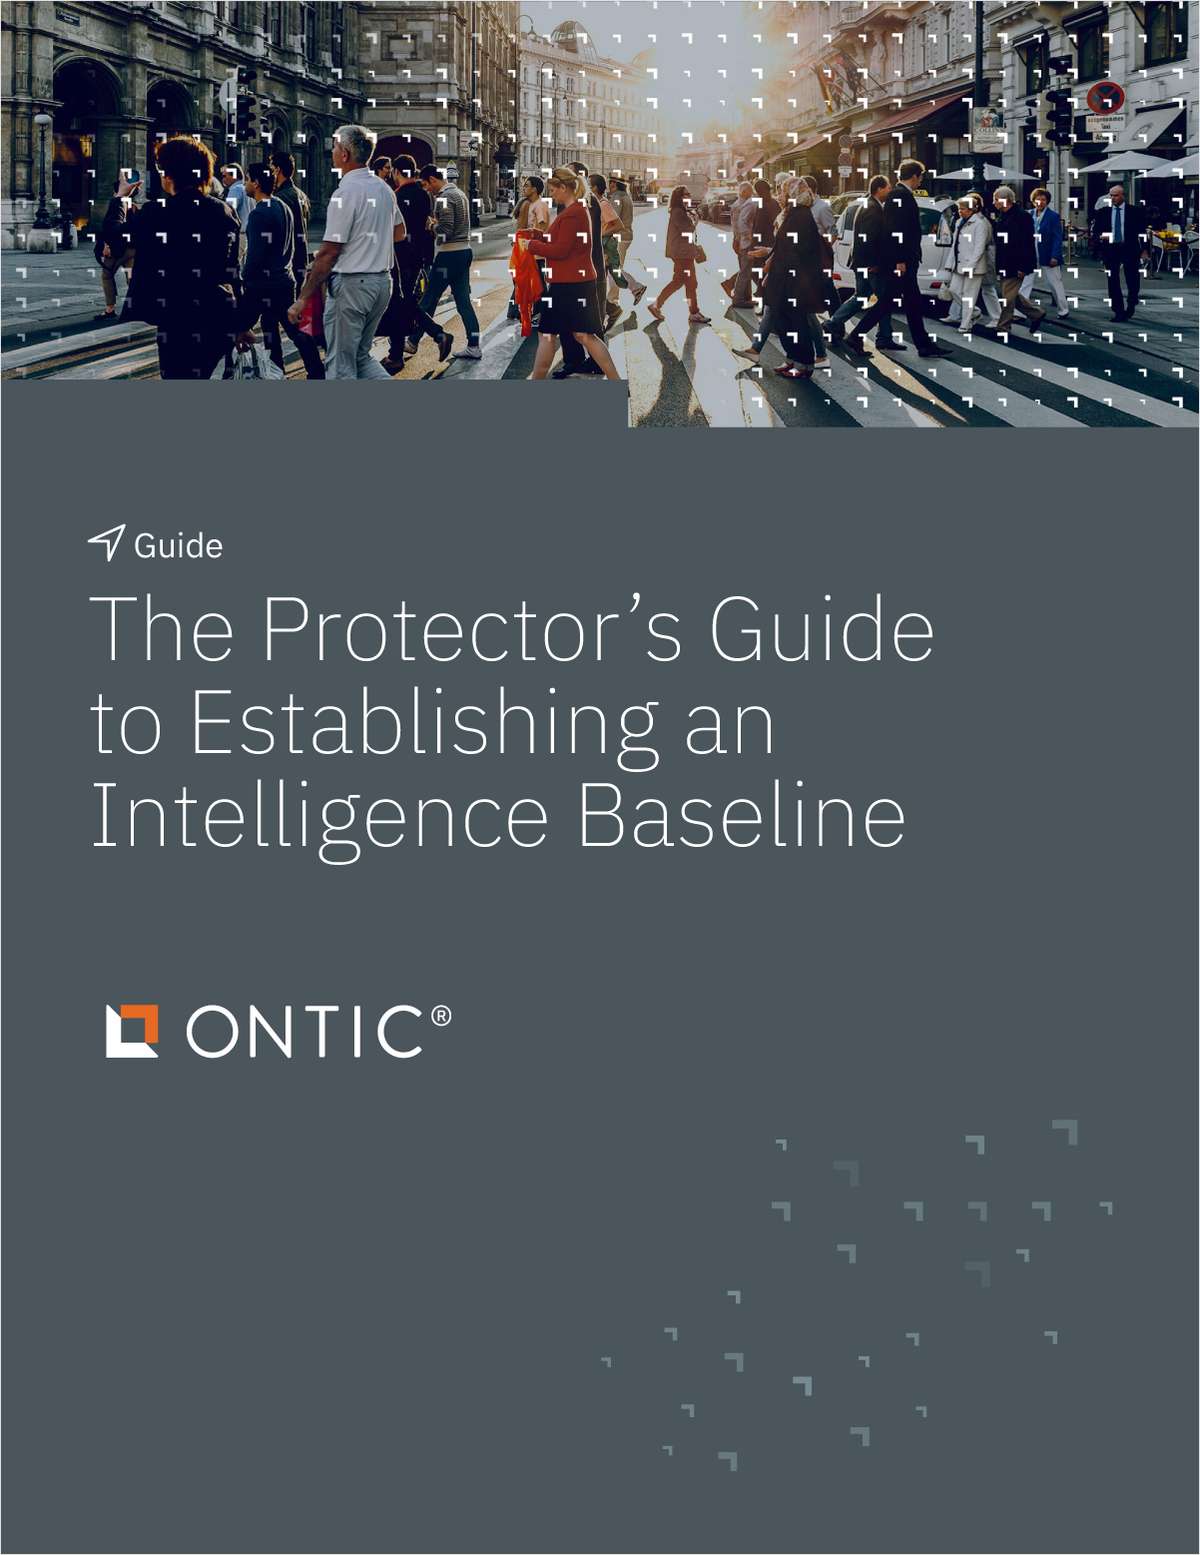 The Protector's Guide to Establishing an Intelligence Baseline